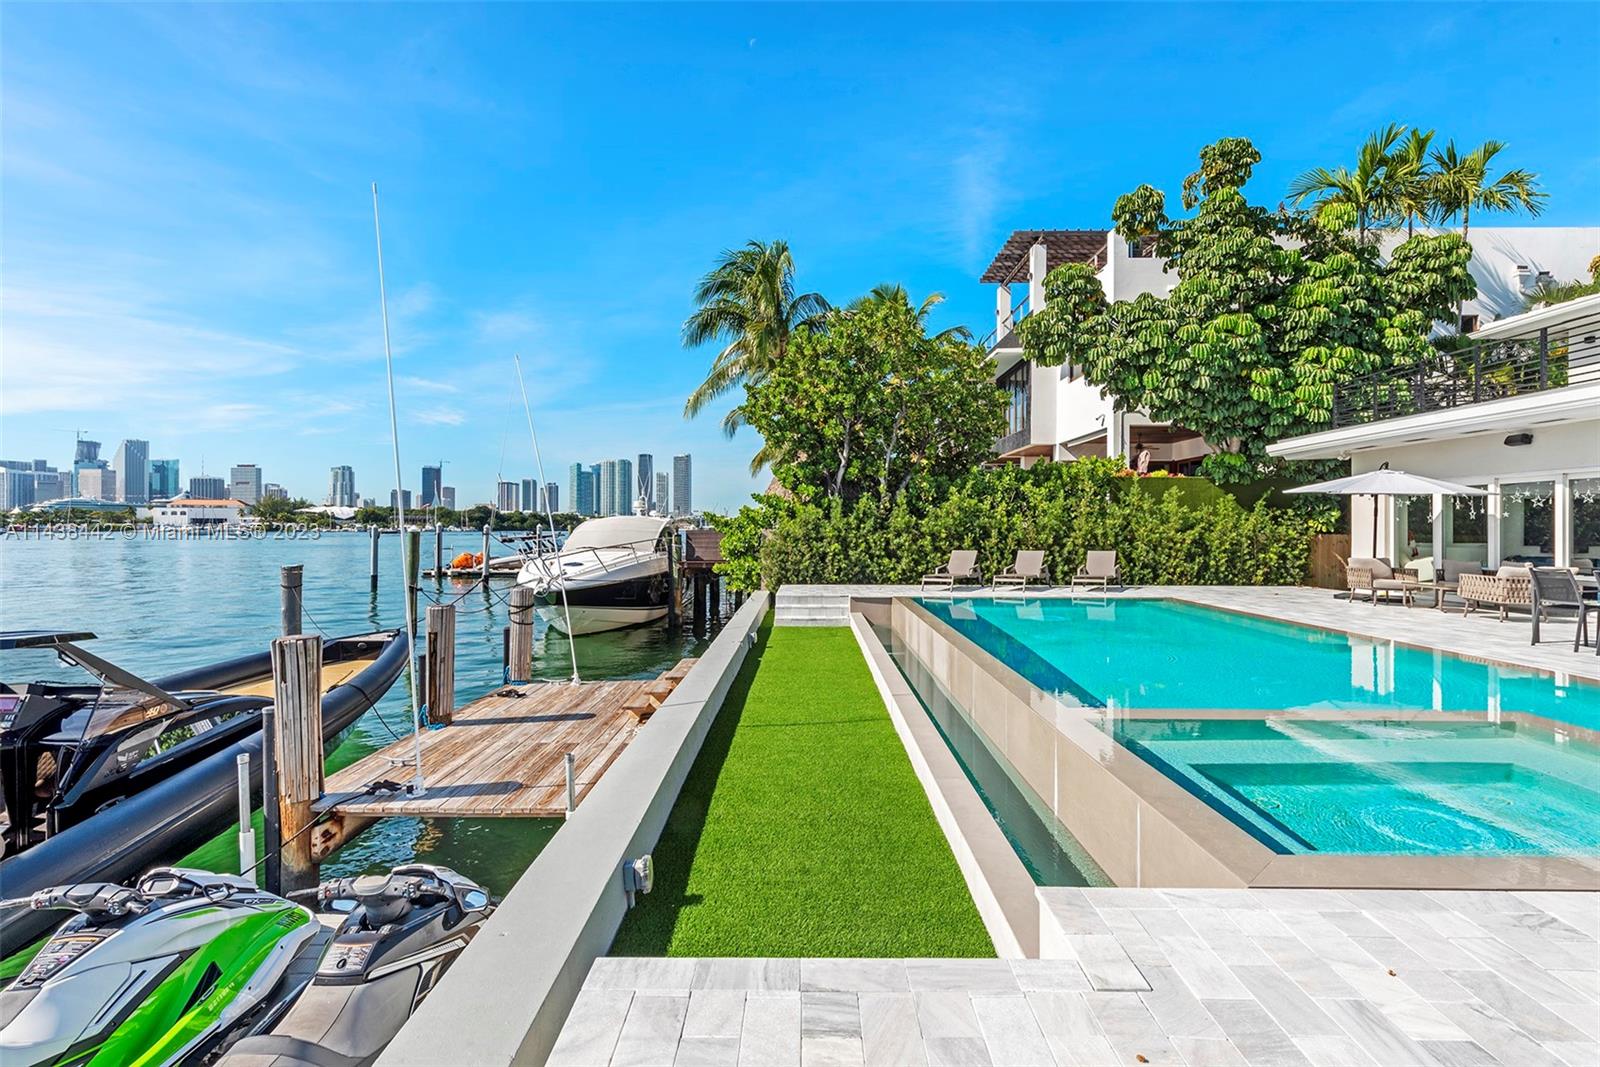 This stunning 2-story southern facing home offers unobstructed open Bay & downtown views, sitting on a 12,250 SF lot & ideal for boaters w/private dock, 70’ WF & direct bay access. Home is adorned w/tile & oak plank wood floors, oversized eat-in kitchen w/top-of-the-line Wolf appliances & marble countertops. Spacious open living area surrounded by walls of glass w/bar & sweeping bay views. Principal suite is an oasis w/beautiful spa bathroom, an oversized balcony w/views over the pool. Outdoor entertaining area with a summer kitchen, infinity pool, ample outdoor lounging areas. This property offers an exceptional Miami lifestyle, combining luxury, stunning views, elegance & outdoor living.